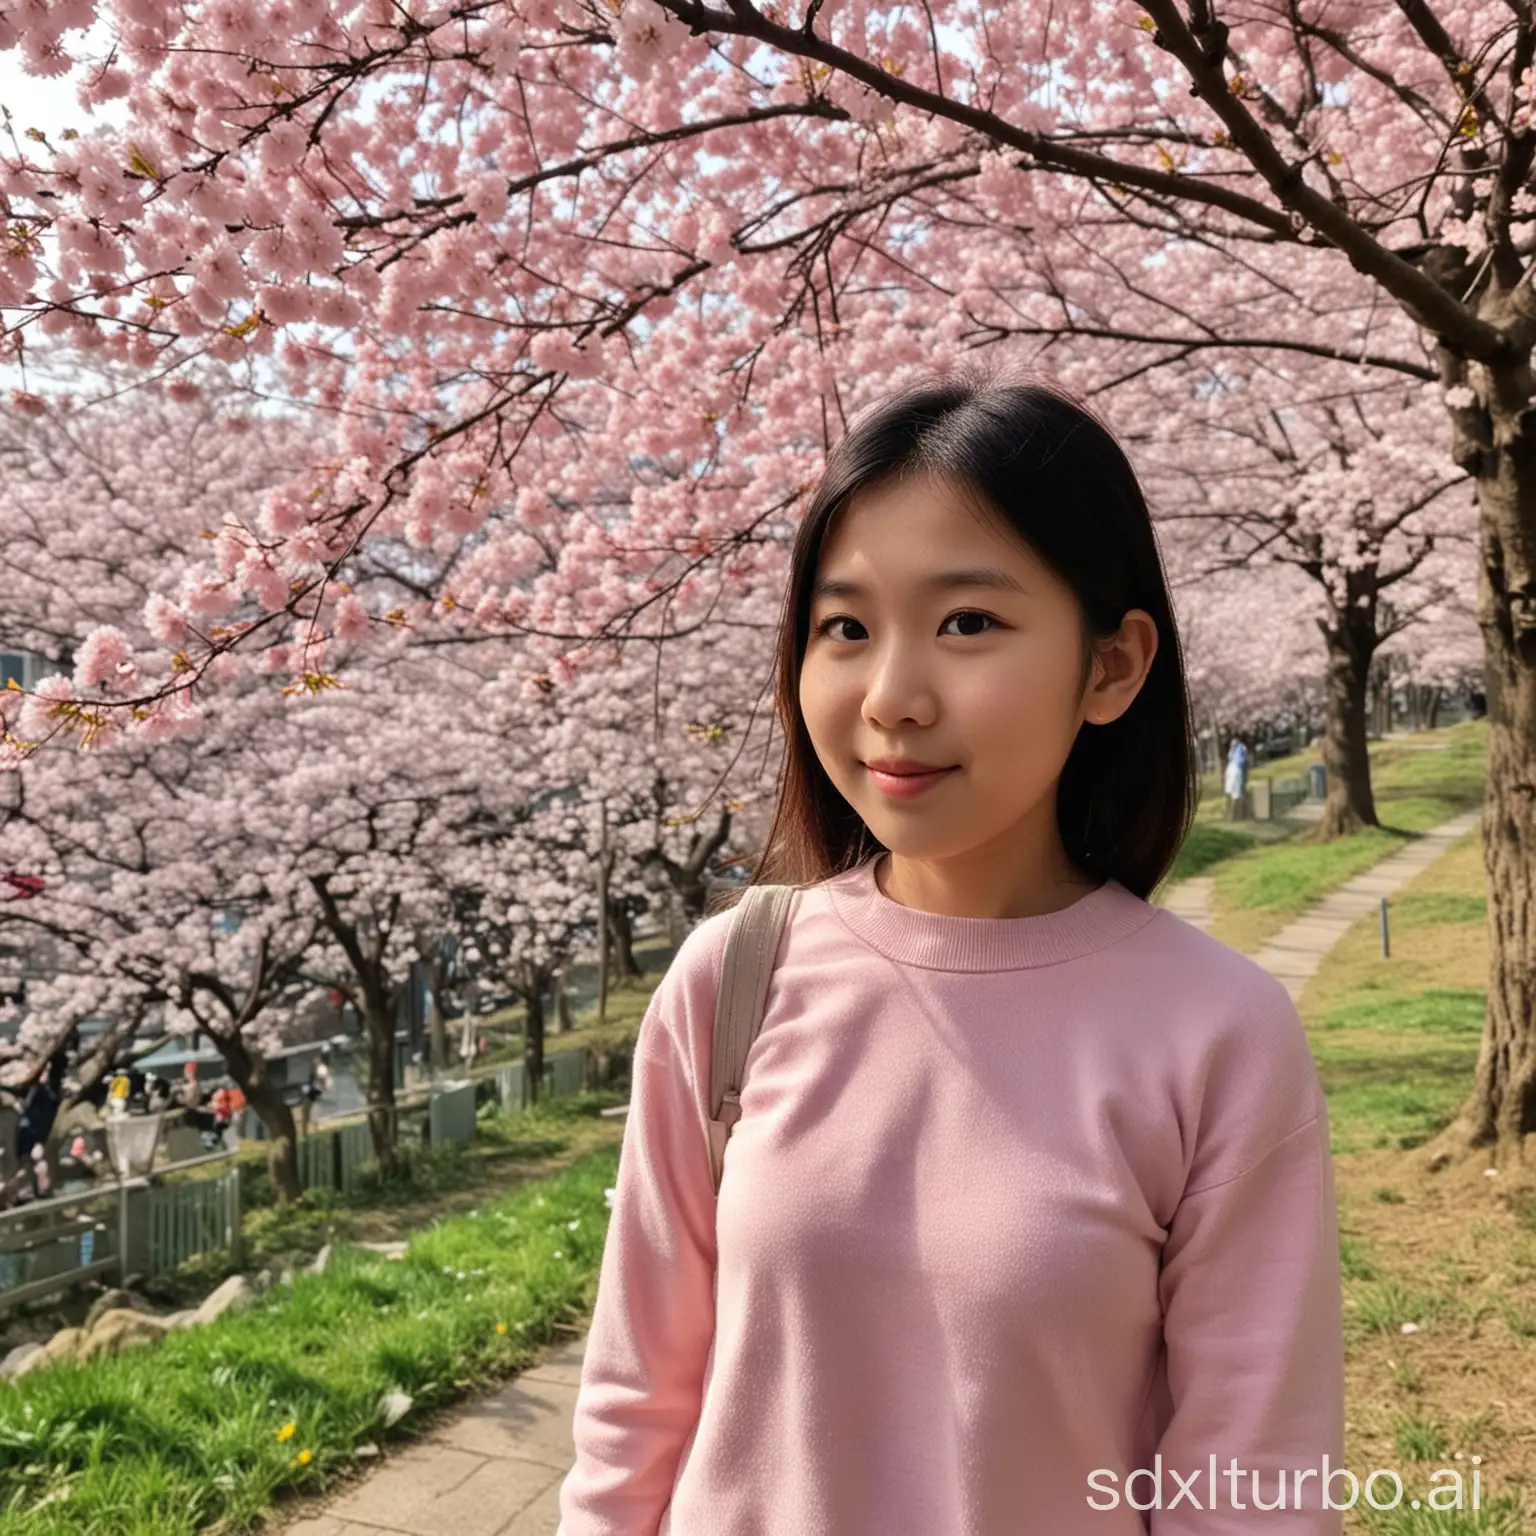 Next to the girl, there are blooming cherry blossoms everywhere.